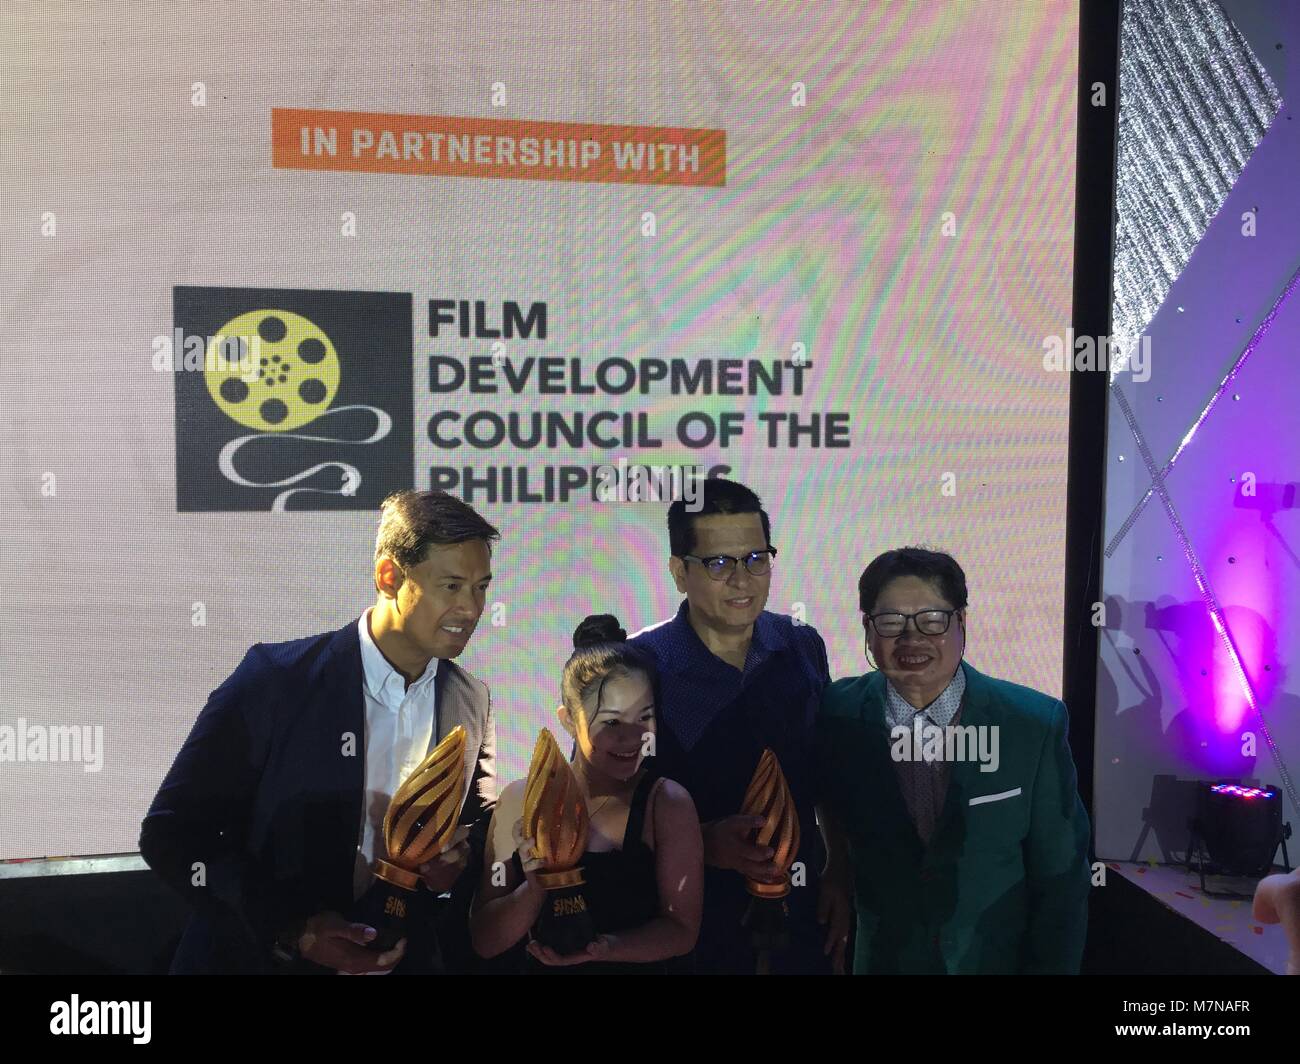 The 4th Sinag Maynila Independent Film Festival concluded at Conrad Hotel in Pasay City with the awarding of the winners in different categories: BEST SHORT FILM: The Duwende by Odin Fernandez BEST DOCUMENTARY: (Mahal, 2017) by Janine Patricia Santos JURY AWARD (DOCUMENTARY): Journeyman Finds Home: The Simone Rota Story by Albert Almendralejo, Maricel Cariaga BEST SOUND: Mikko Quizon for Abomination BEST MUSIC: Fergus Cronkite for Melody/Random/Melbourne! BEST PRODUCTION DESIGN: El Peste BEST EDITING: Diego Marx Robles for Tale of the Lost Boys BEST CINEMATOGRAPHY: Pipo Domagas for Bomba (The Stock Photo